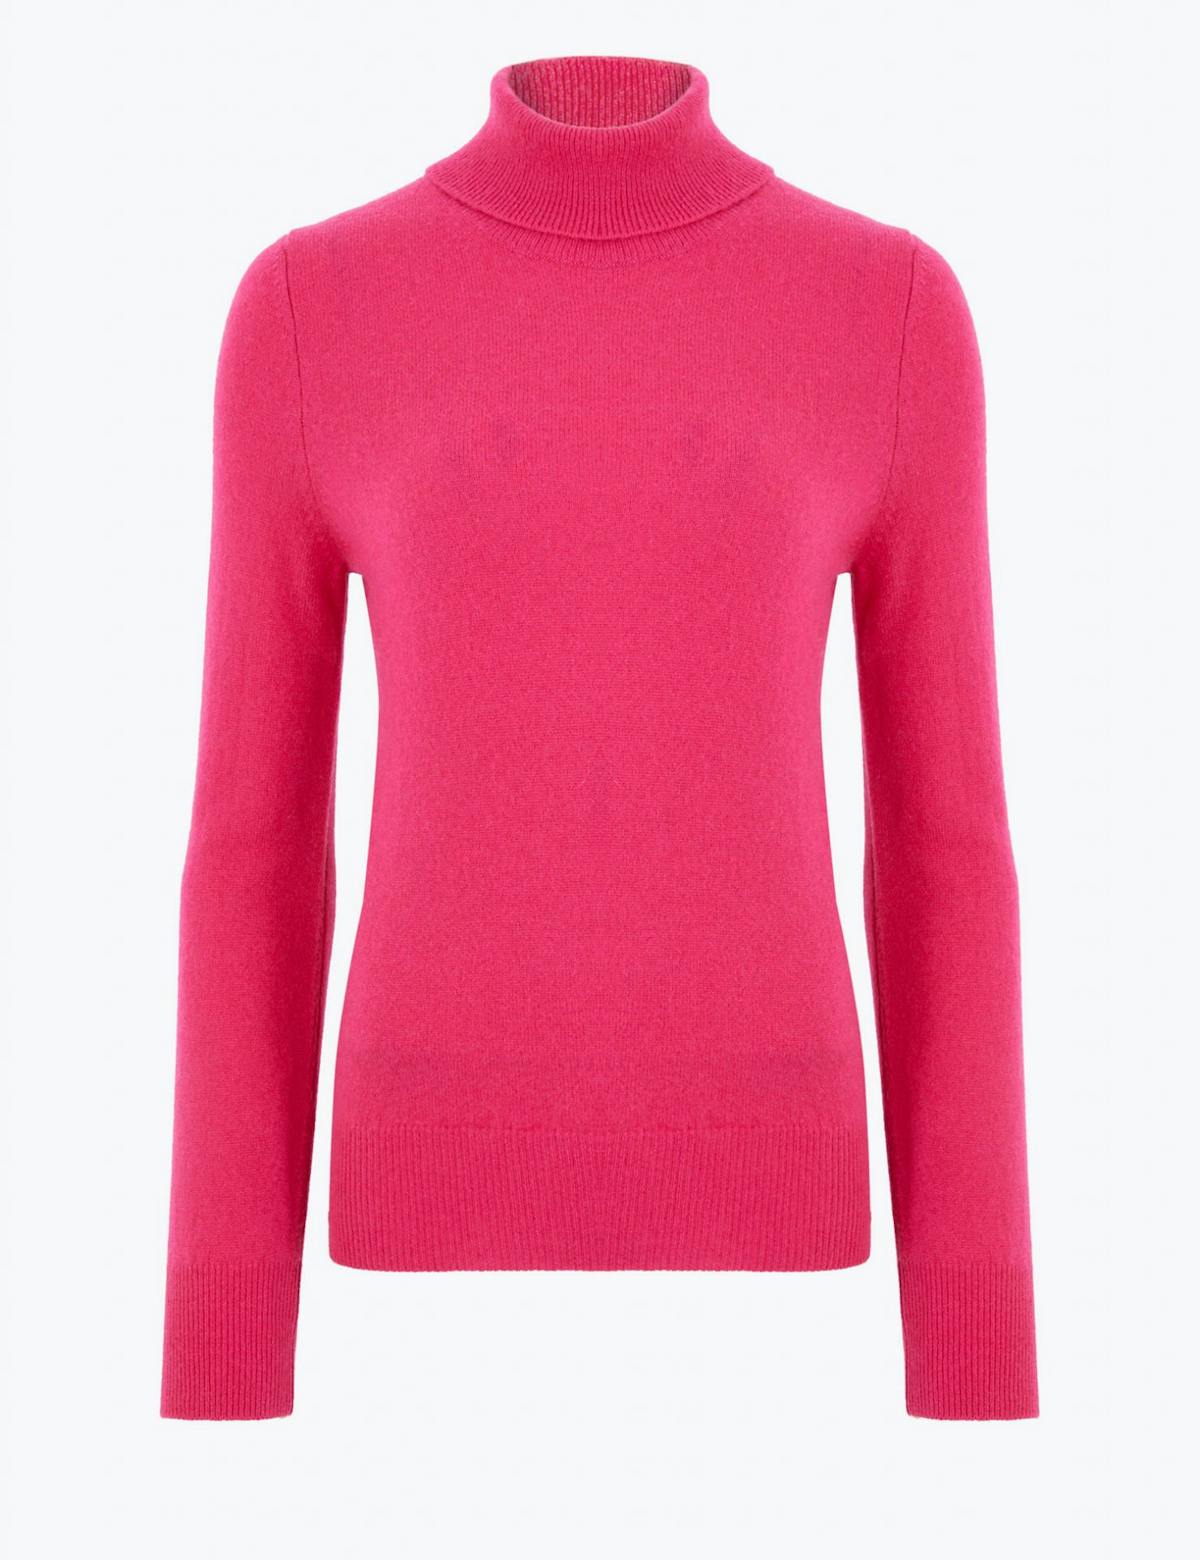 The 9 most stylish high-street cashmere jumpers right now